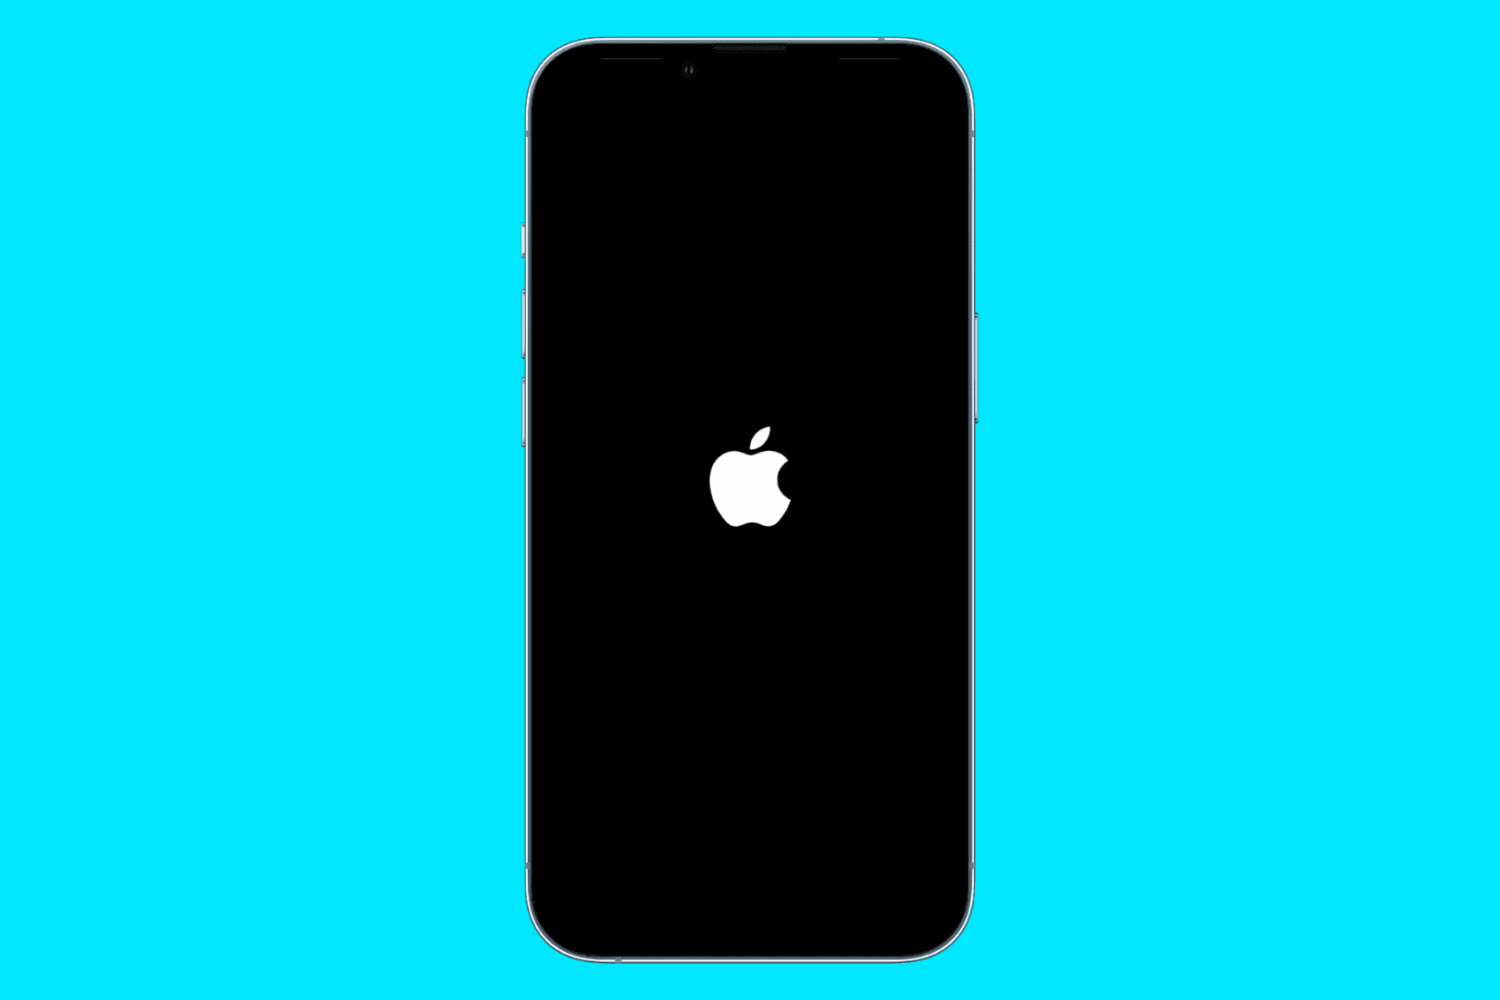 iPhone reboot screen showing the white Apple logo on black background